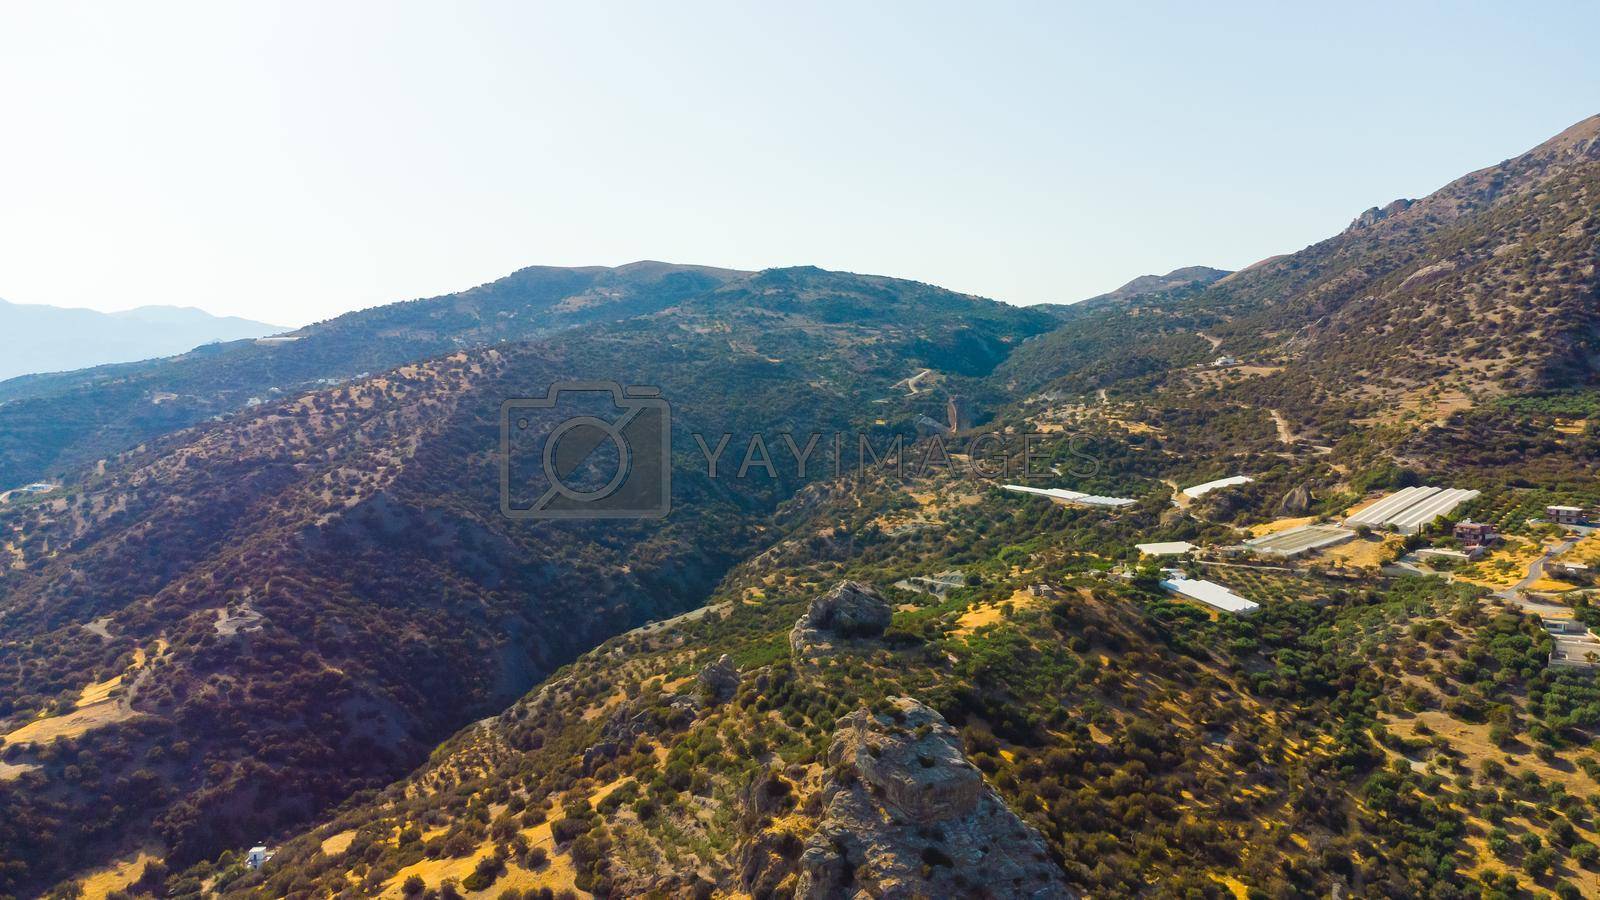 Greece, Crete, landscape with olive trees and tiny mountain village.